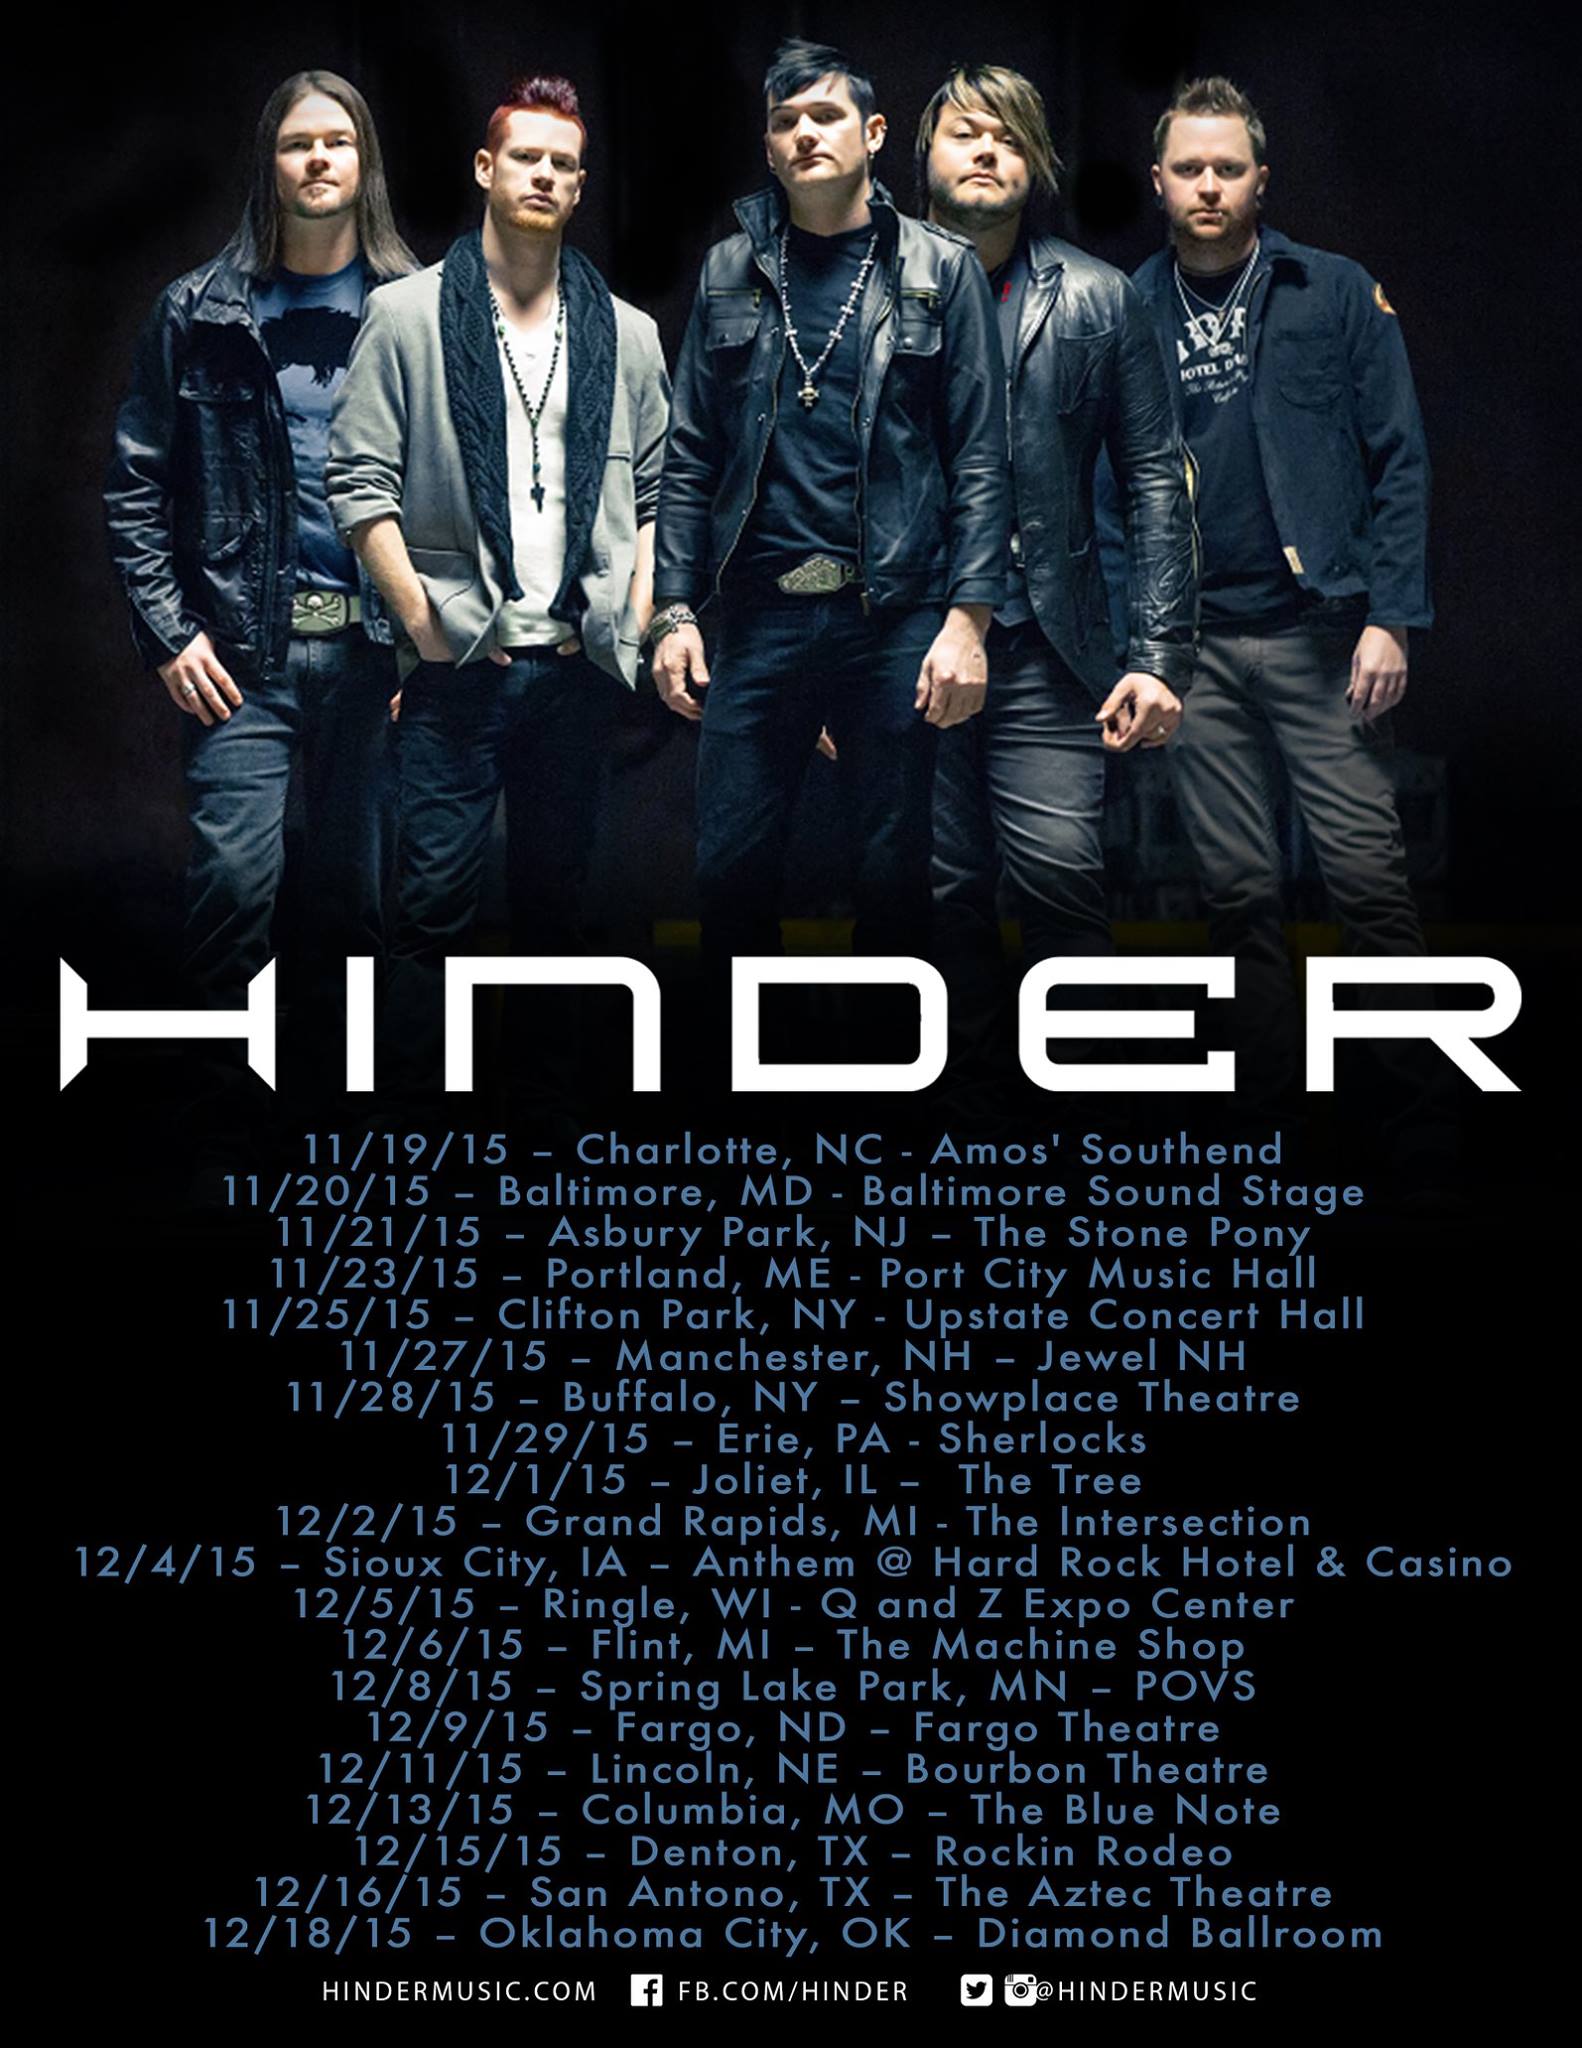 Hinder announced their Winter Tour with special guests, Saving Abel